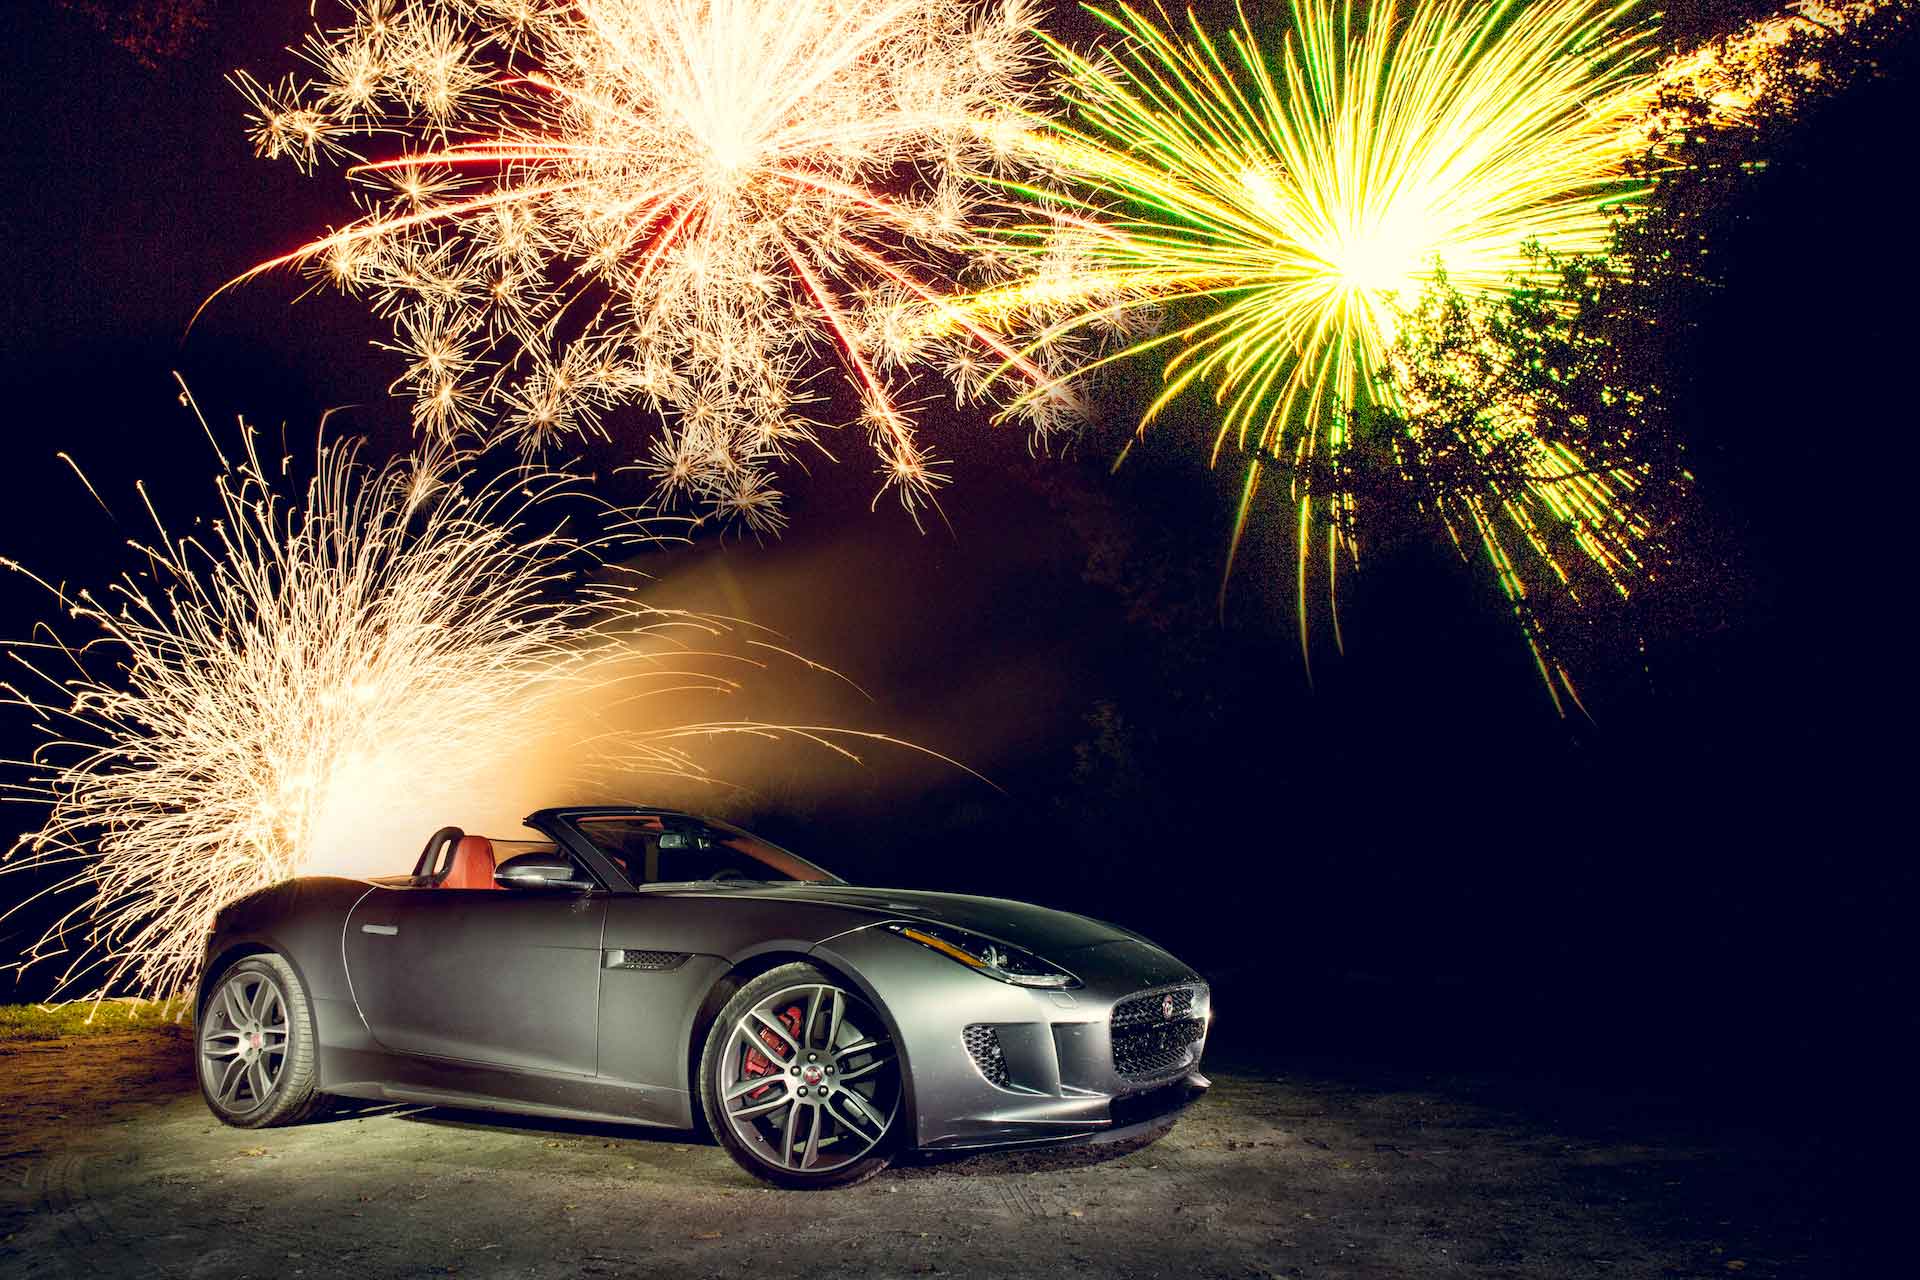 Driving a Jaguar F-Type R to the Best Damn Fireworks Shop in America